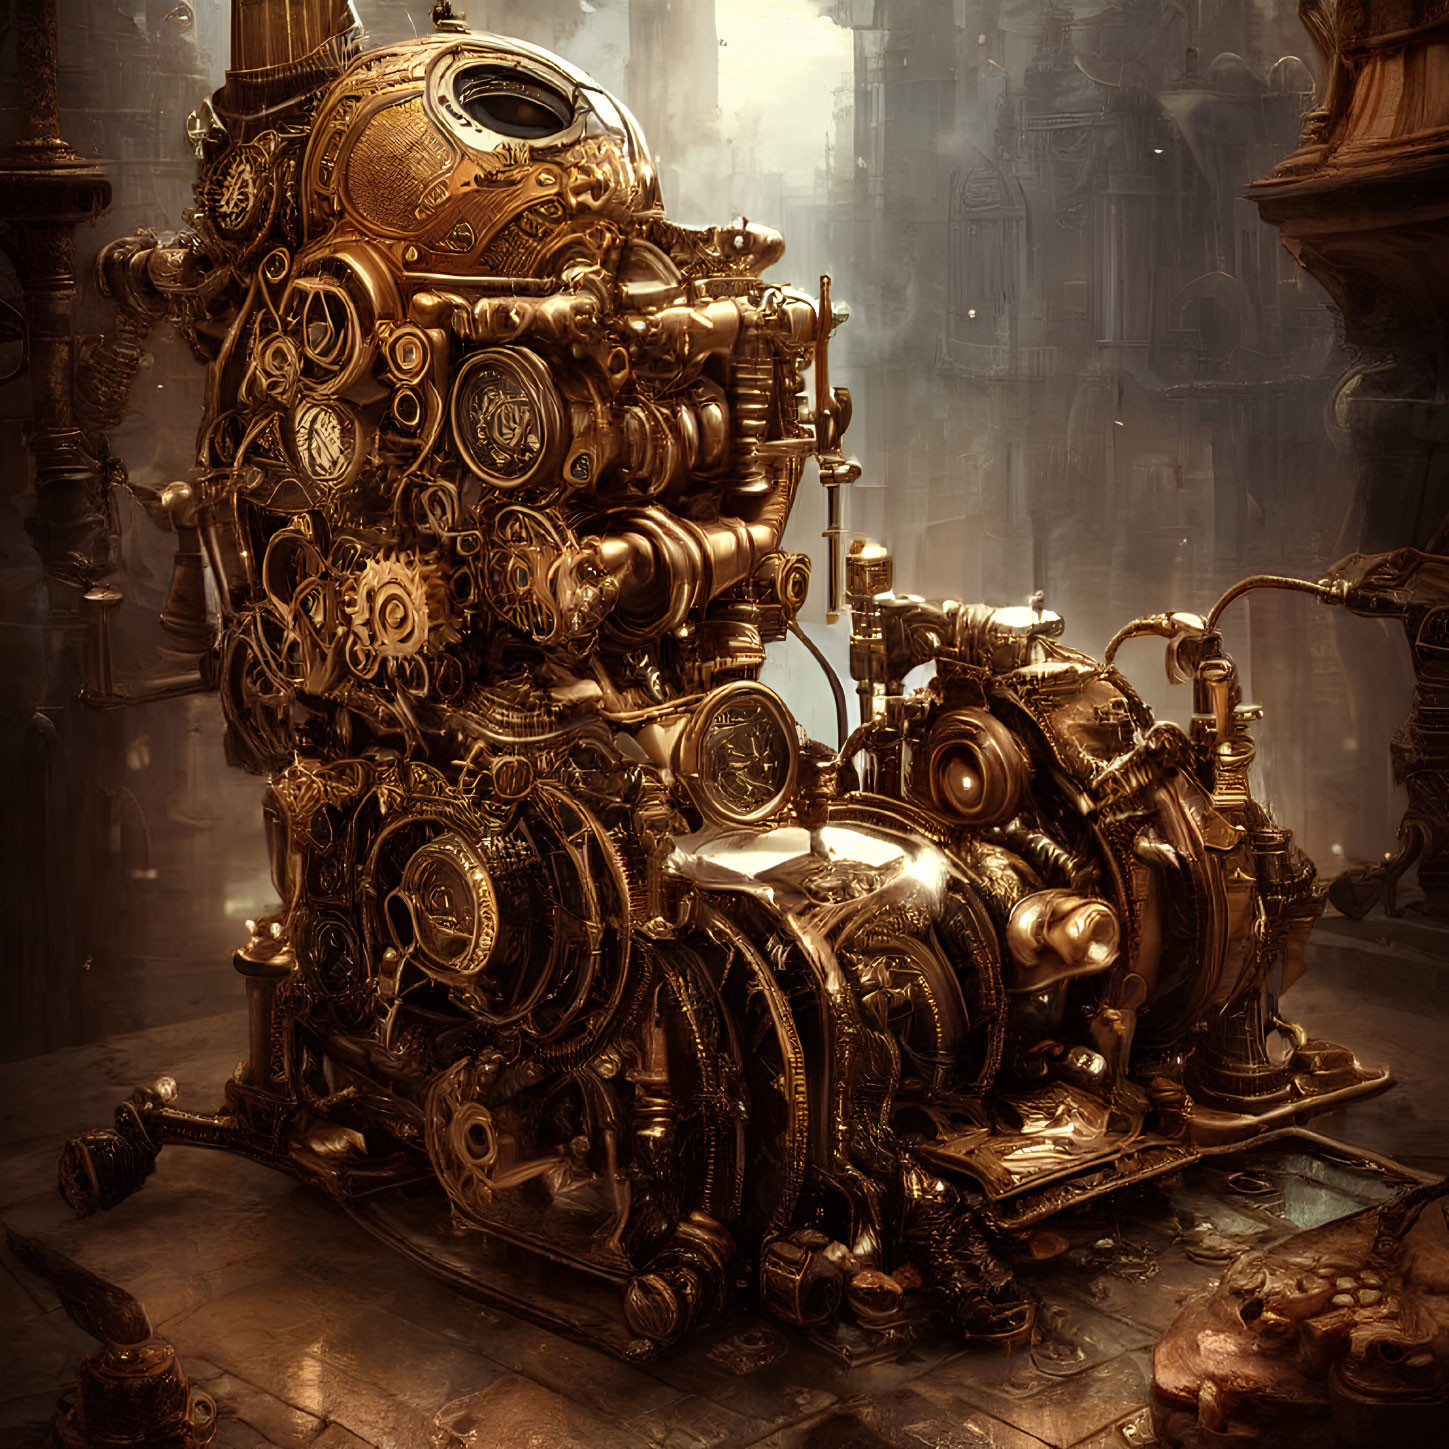 Intricate Steampunk Machine with Gears in Industrial Setting